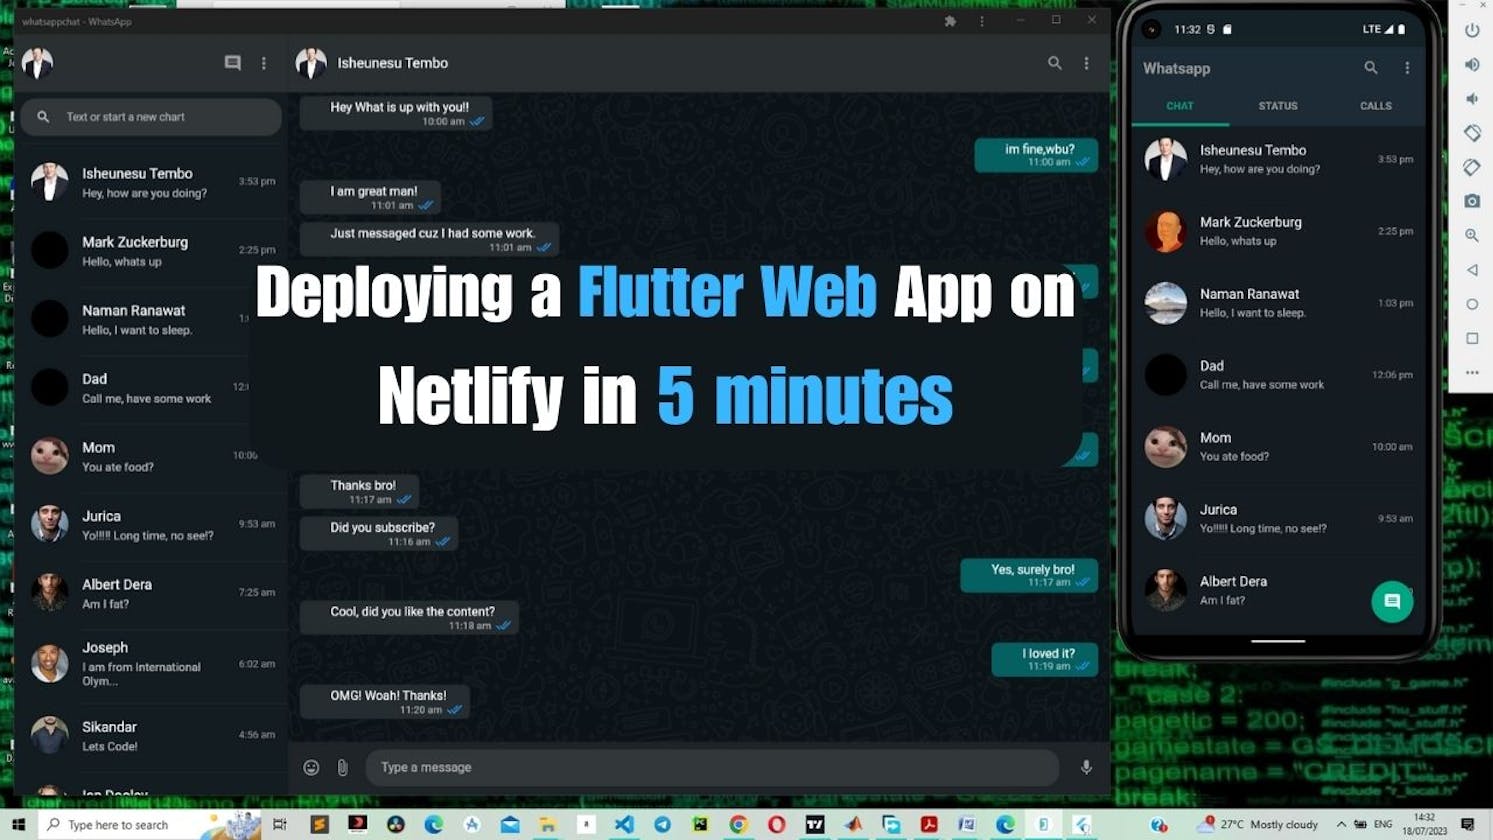 How to deploy a flutter web app in less than 5 minutes on Netlify